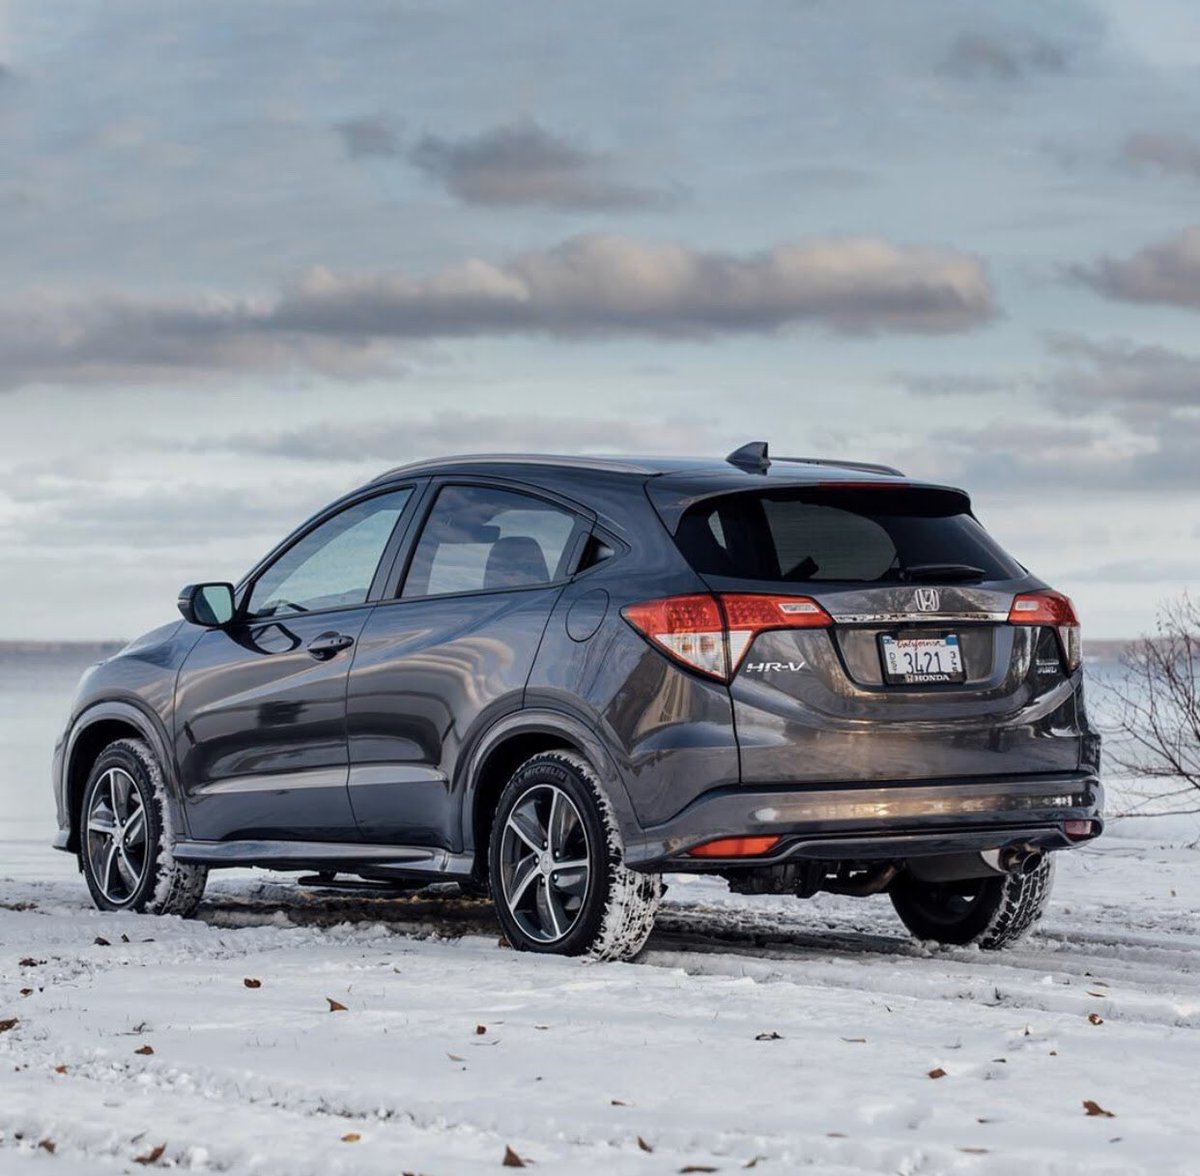 What’s your #GroundHogDay prediction? 6 more weeks of #winter or early #spring? #HondaHRV